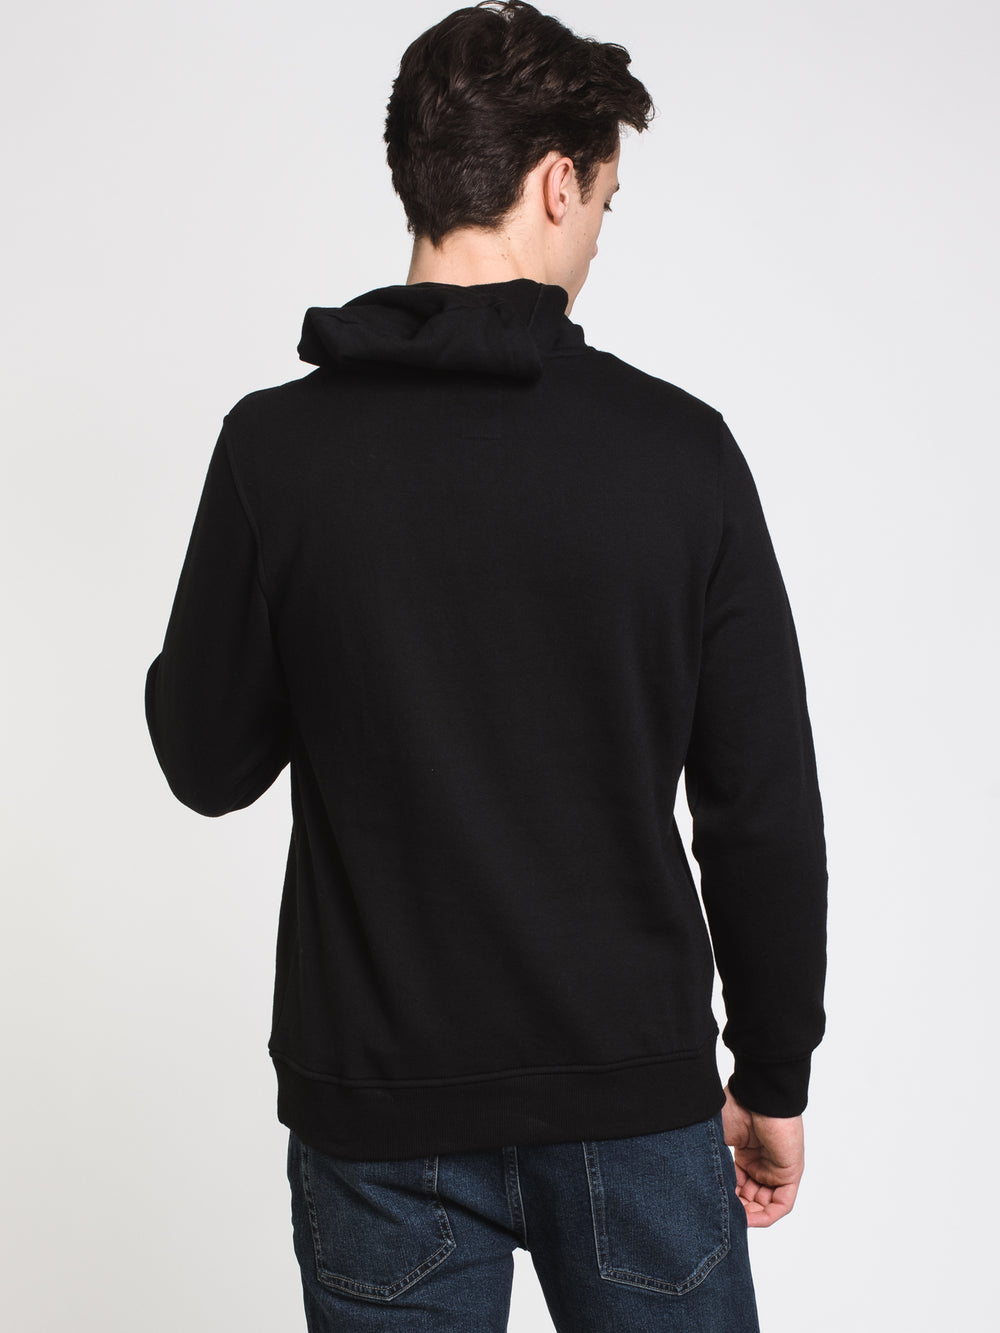 MENS LEAGUE PULLOVER HOODIE - BLACK - CLEARANCE